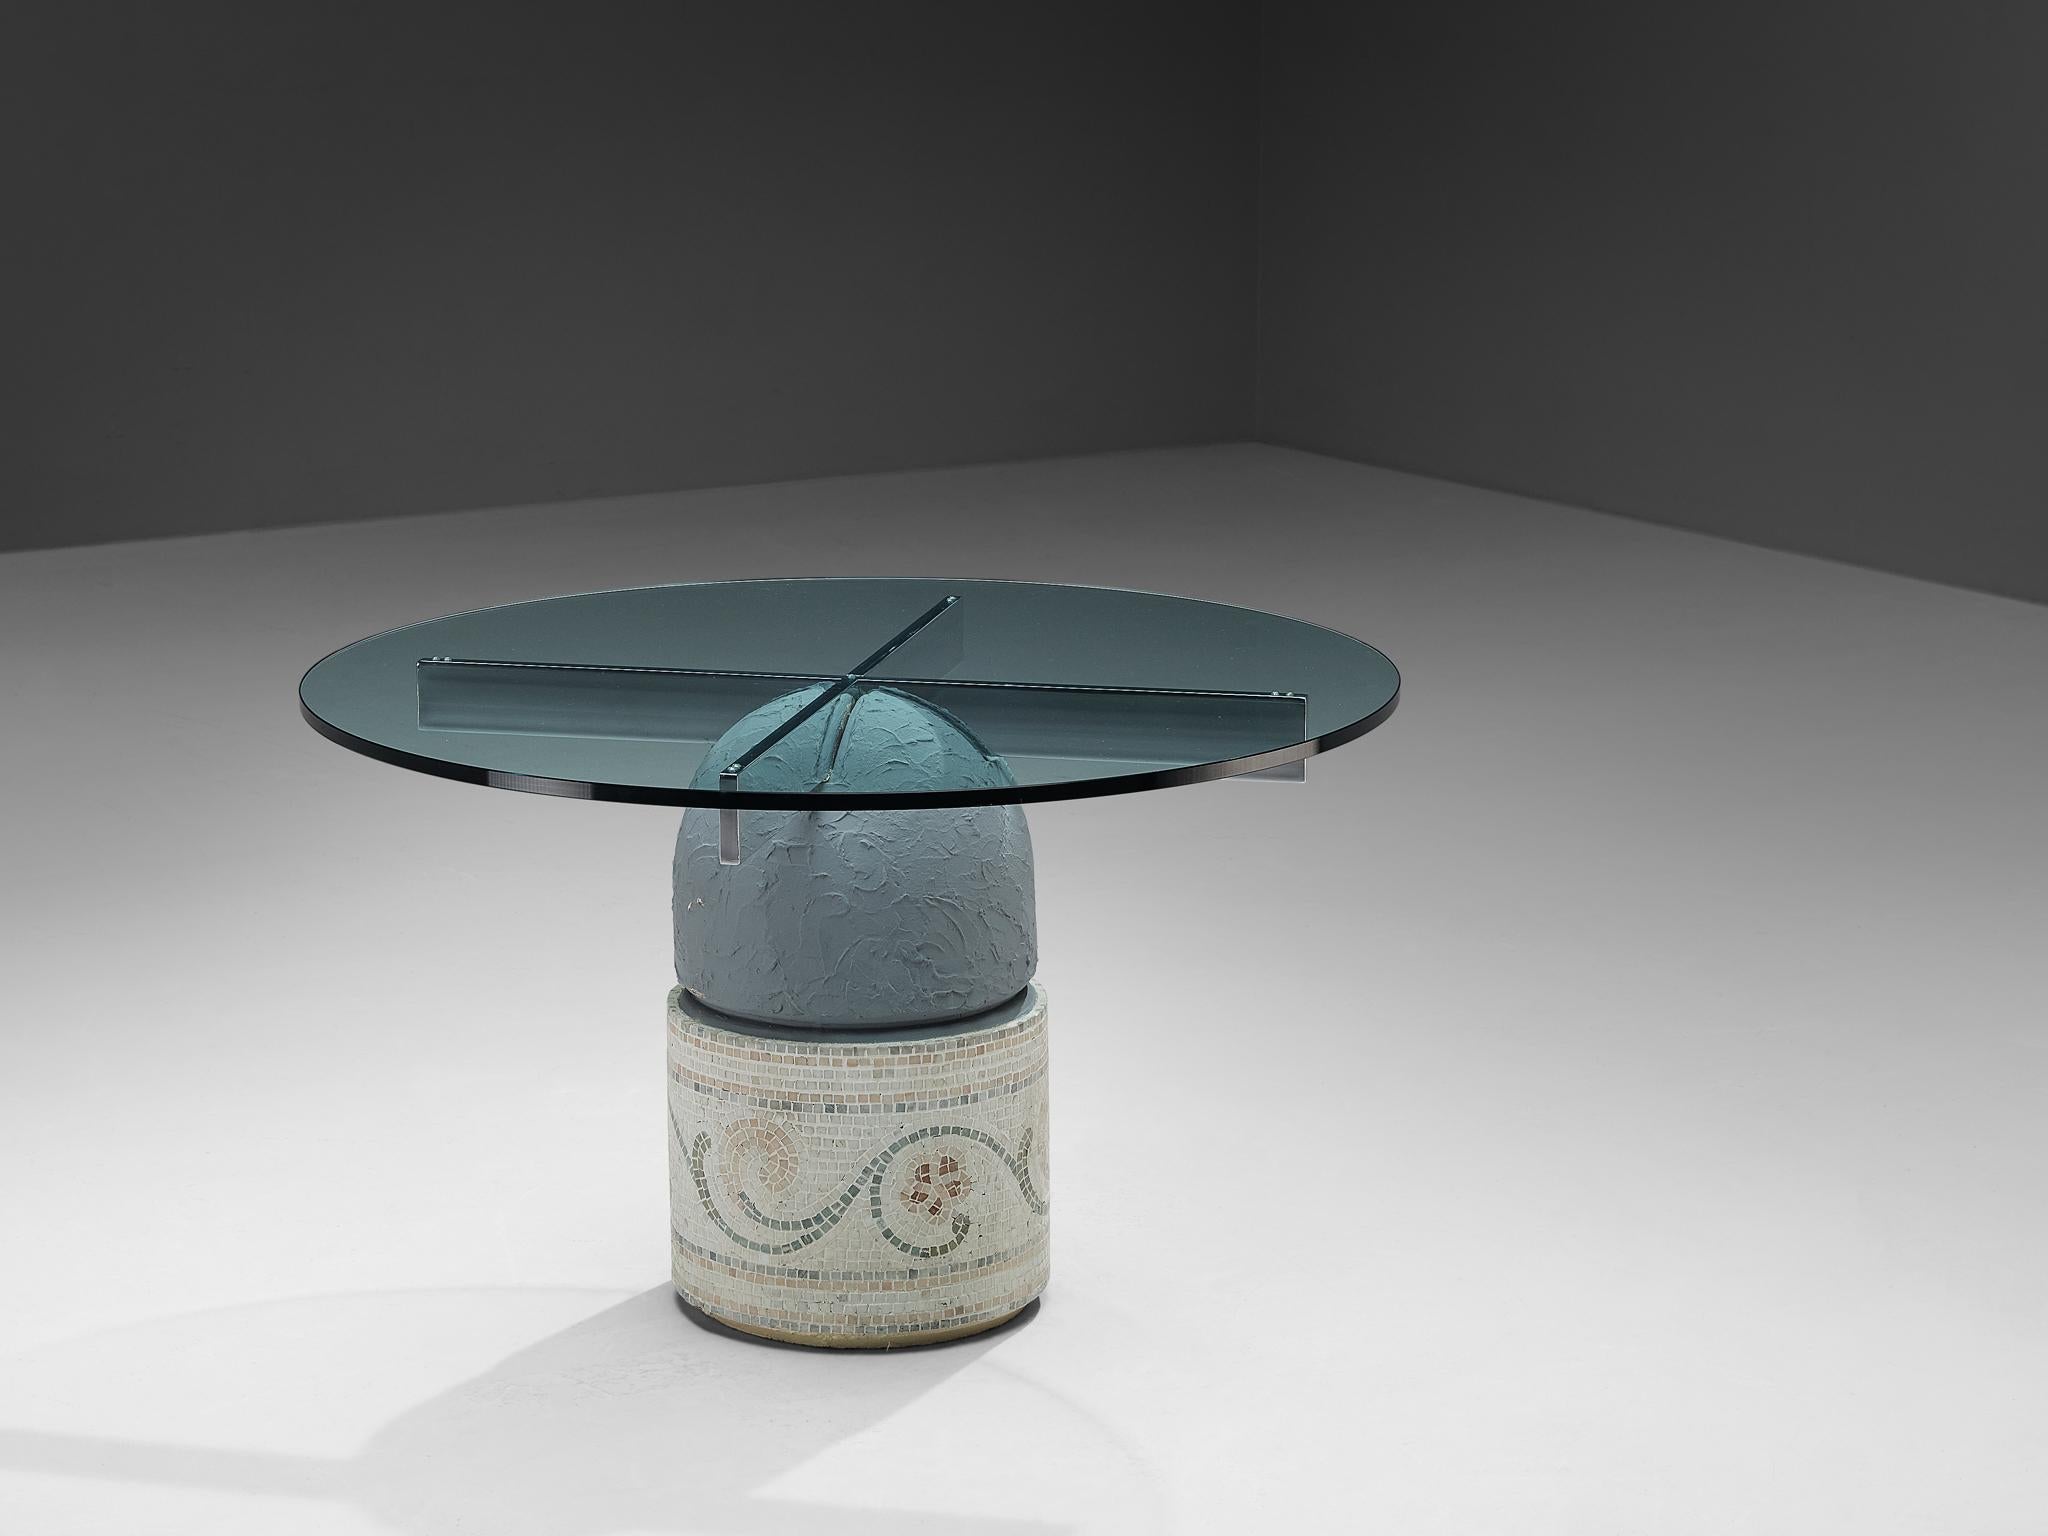 Giovanni Offredi for Saporiti 'Paracarro' Dining Table in Glass and Mosaic